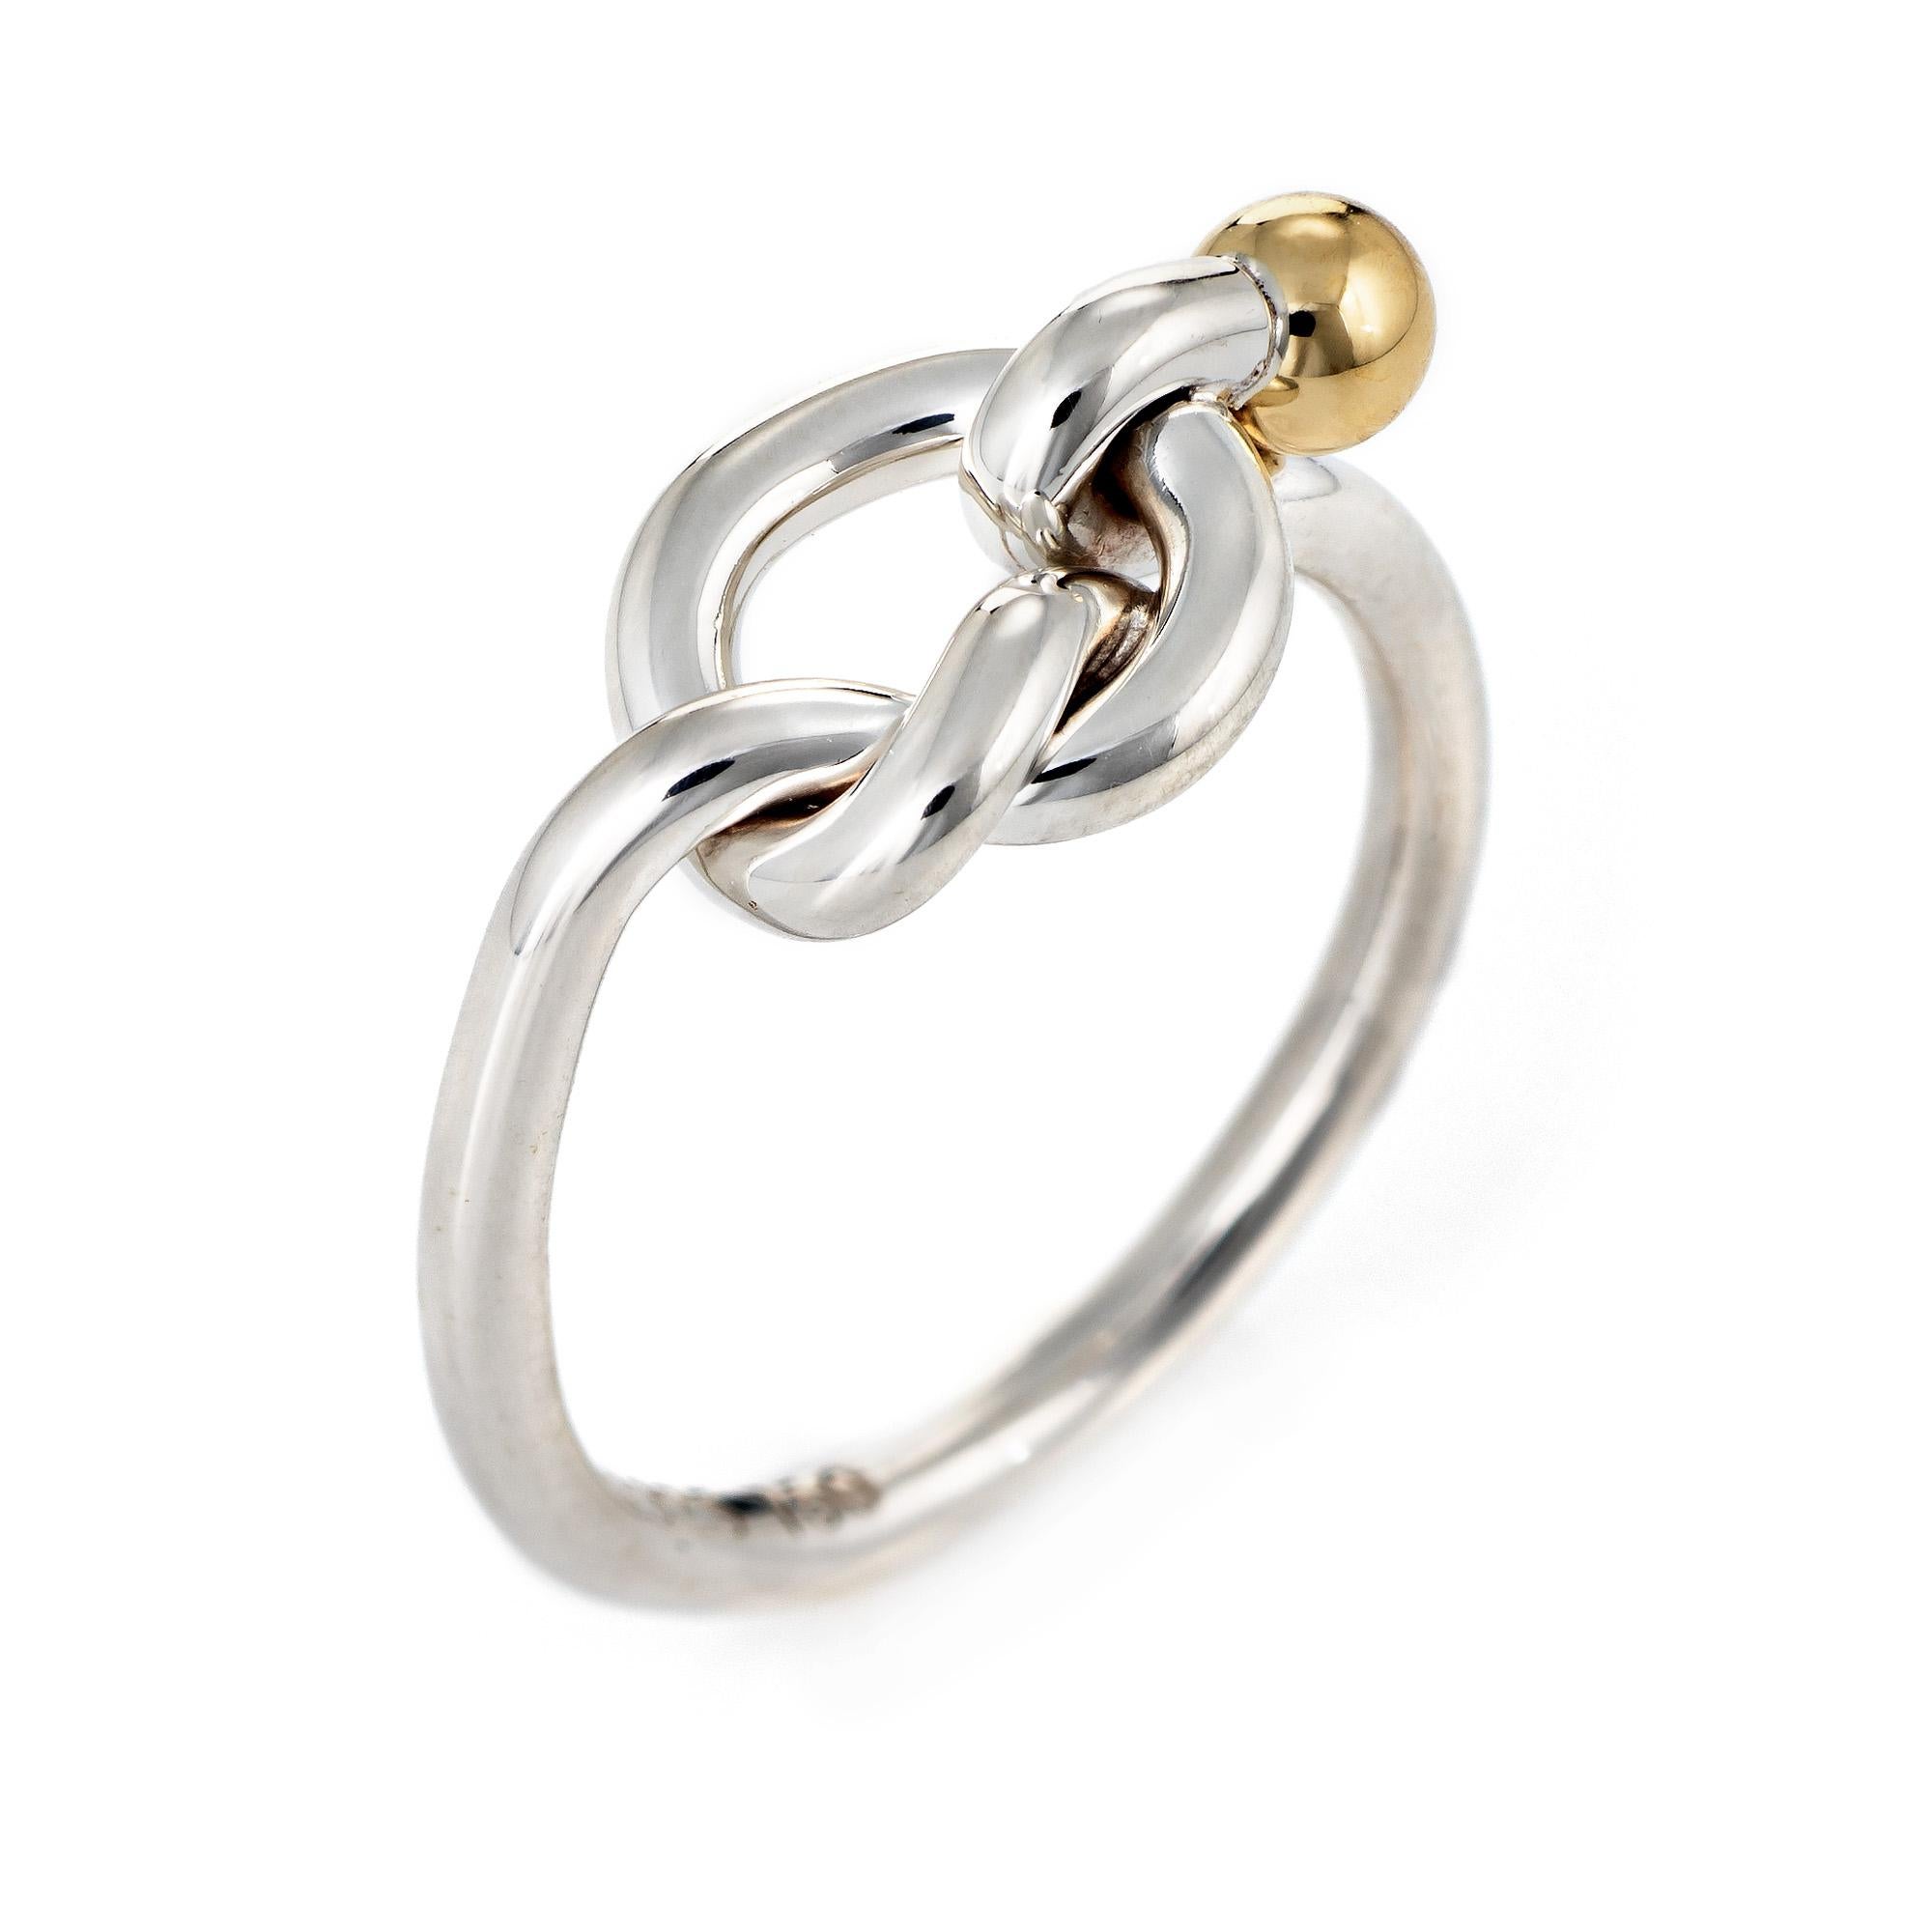 Finely detailed pre-owned Tiffany & Co love knot ring crafted in sterling silver & 18 karat yellow gold. 

The stylish ring features a love knot finished with an 18k yellow gold orb. The low rise ring (3.5mm - 0.13 inches) sits comfortably on the